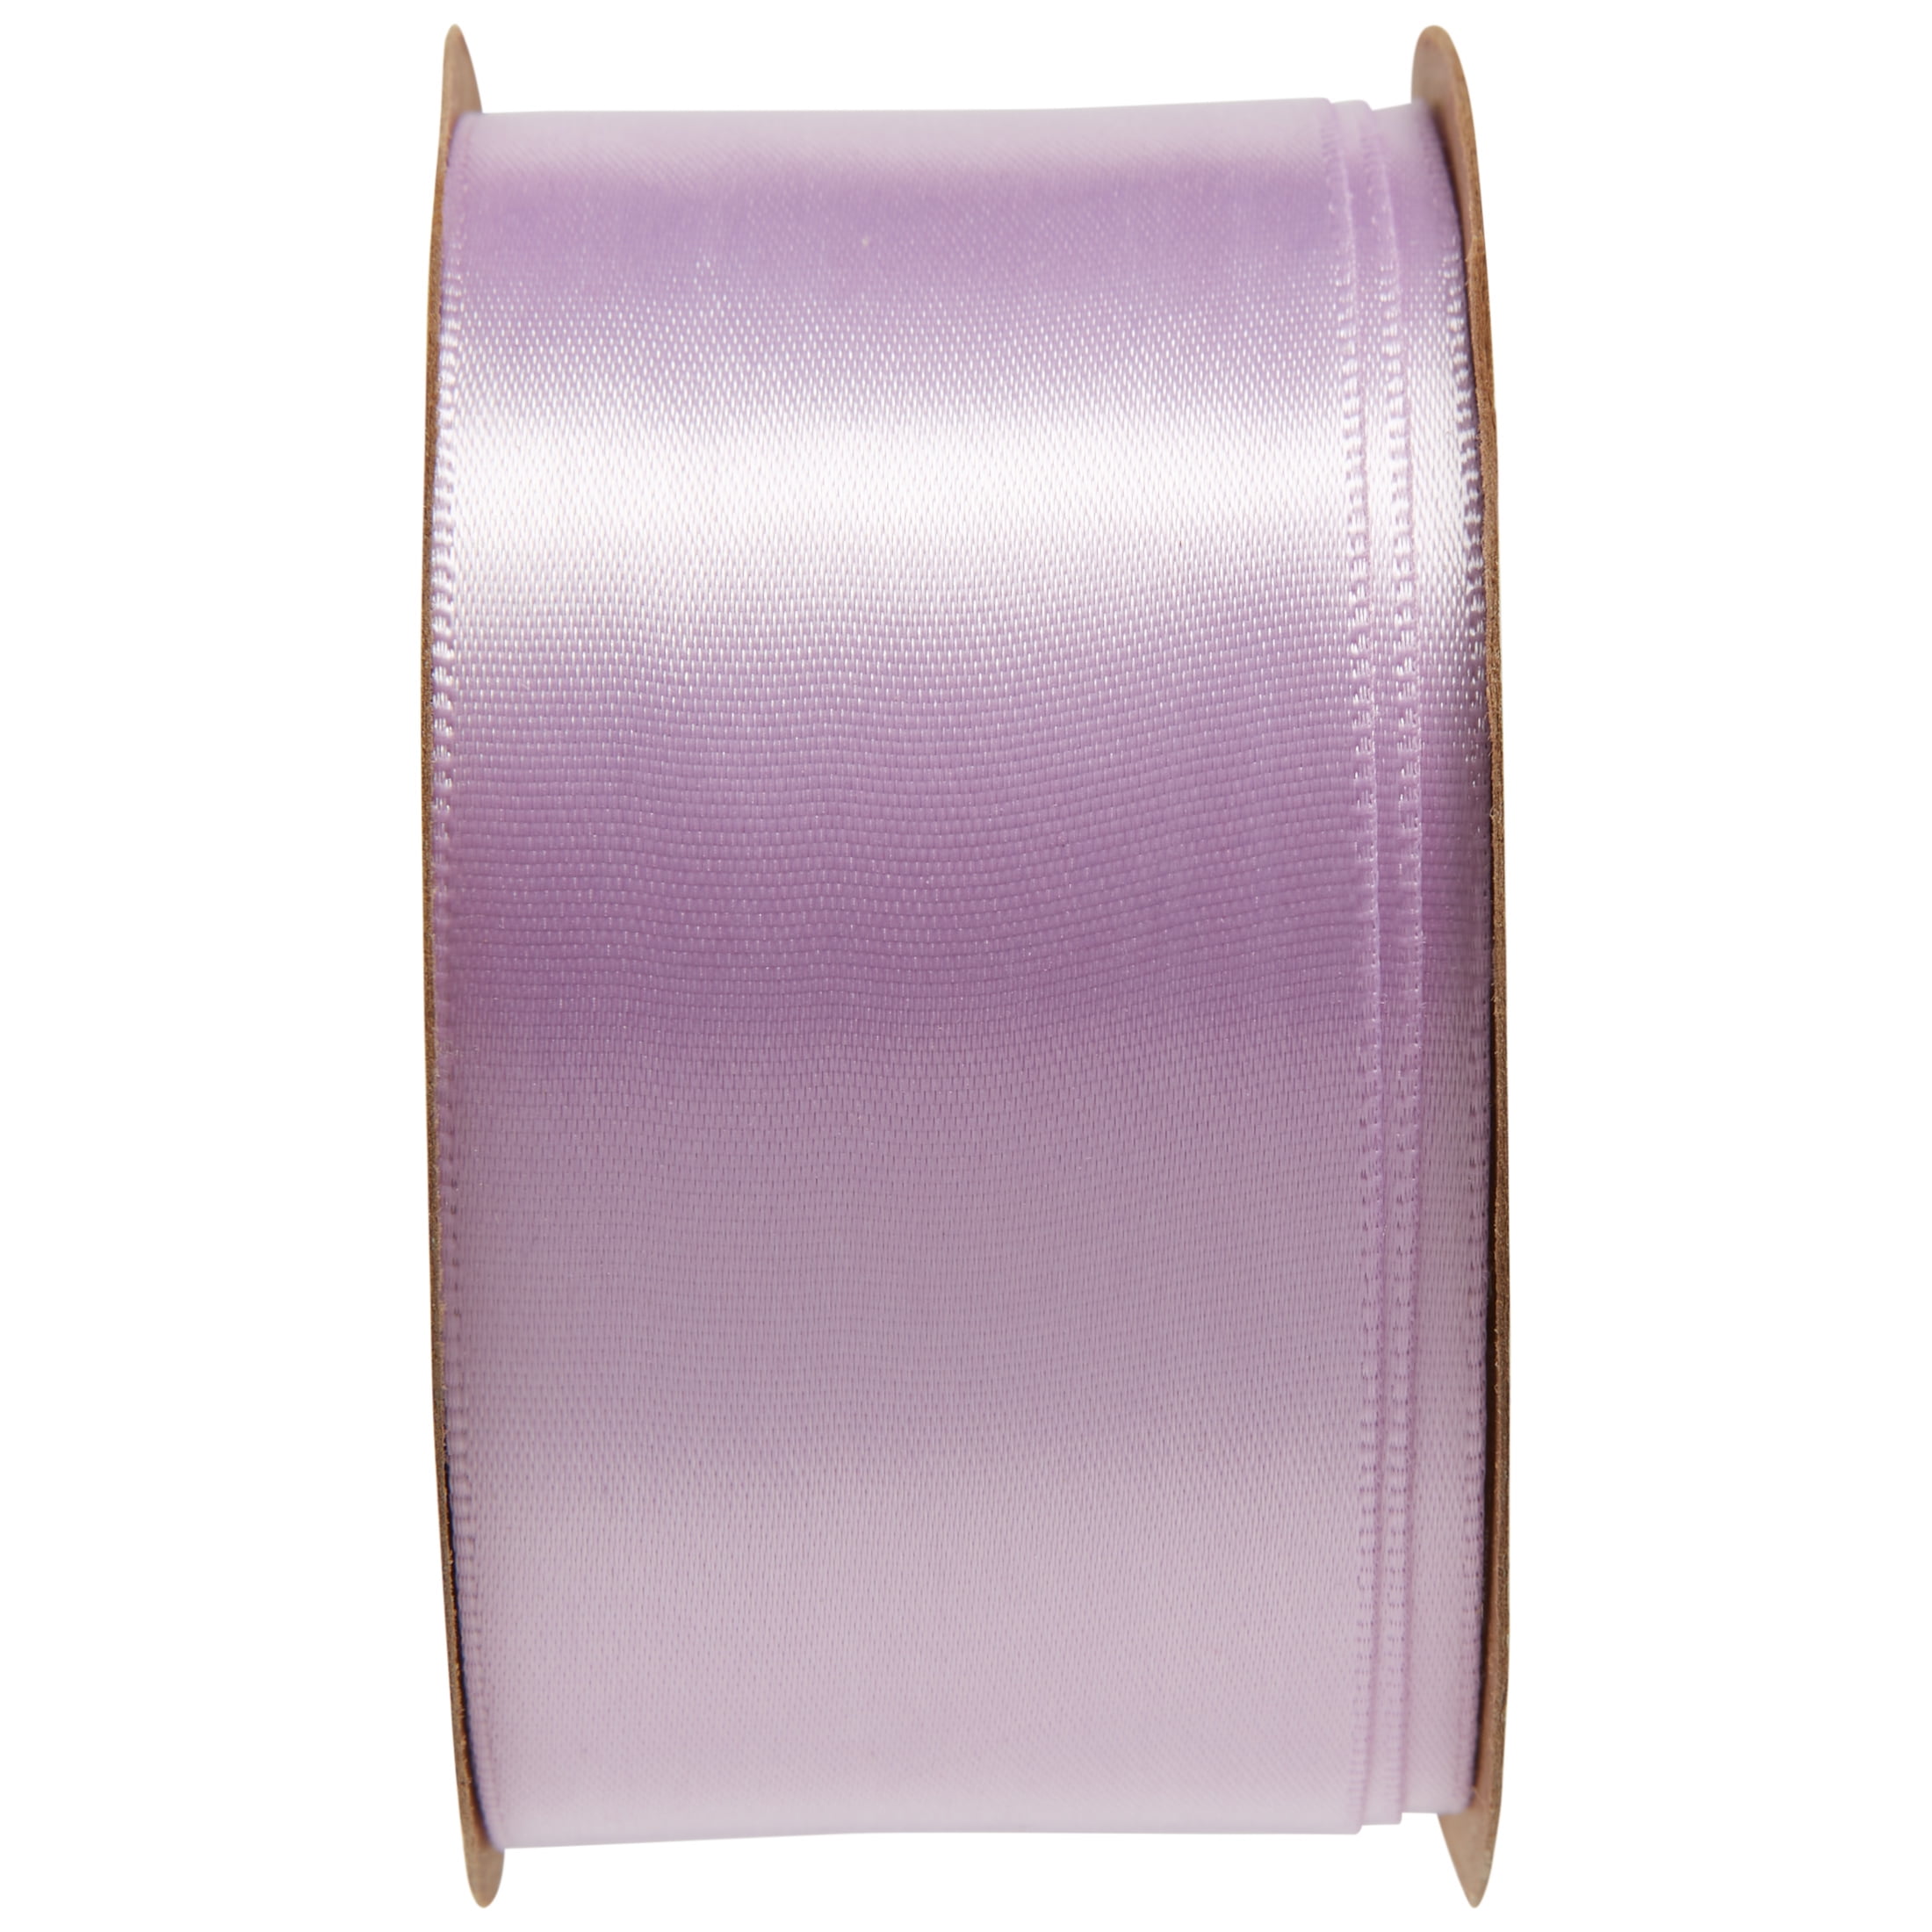 RIBROS-430 – 5/8″ Light Orchid Satin Ribbon Roses and Olive Leaves